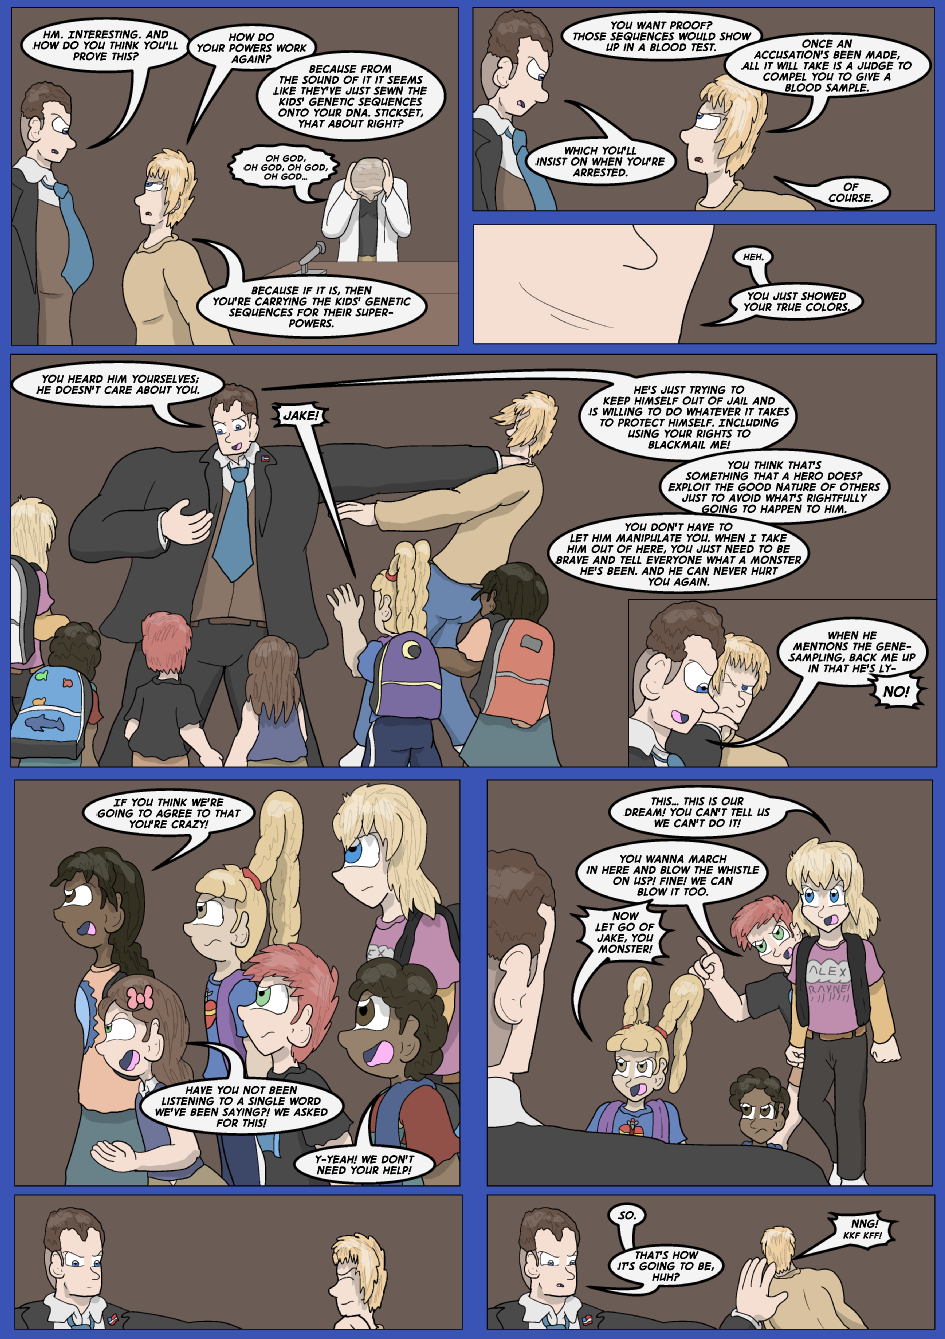 Showing Your Blue Colors- Page 12